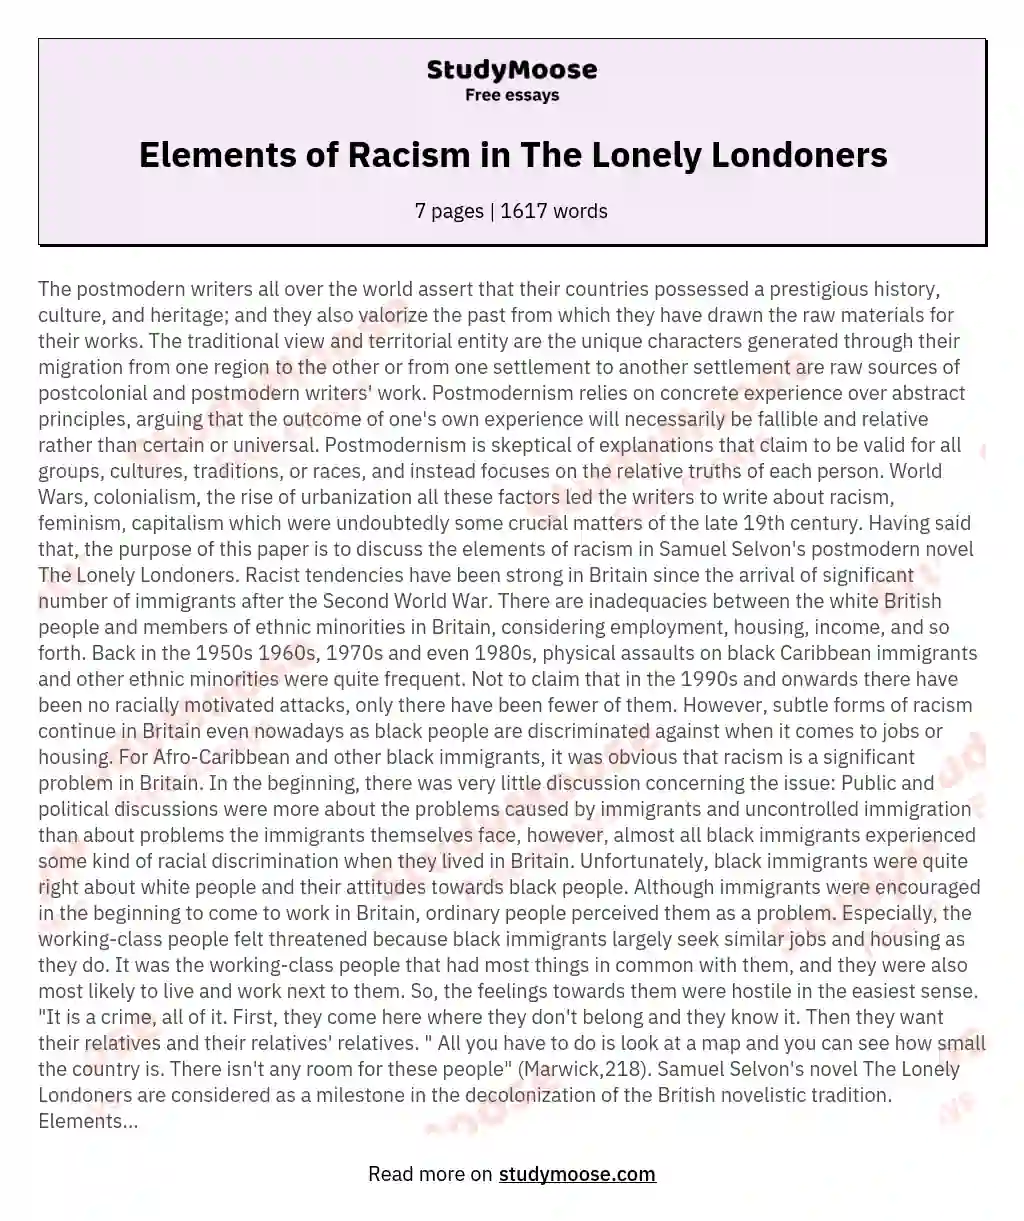 Elements of Racism in The Lonely Londoners essay